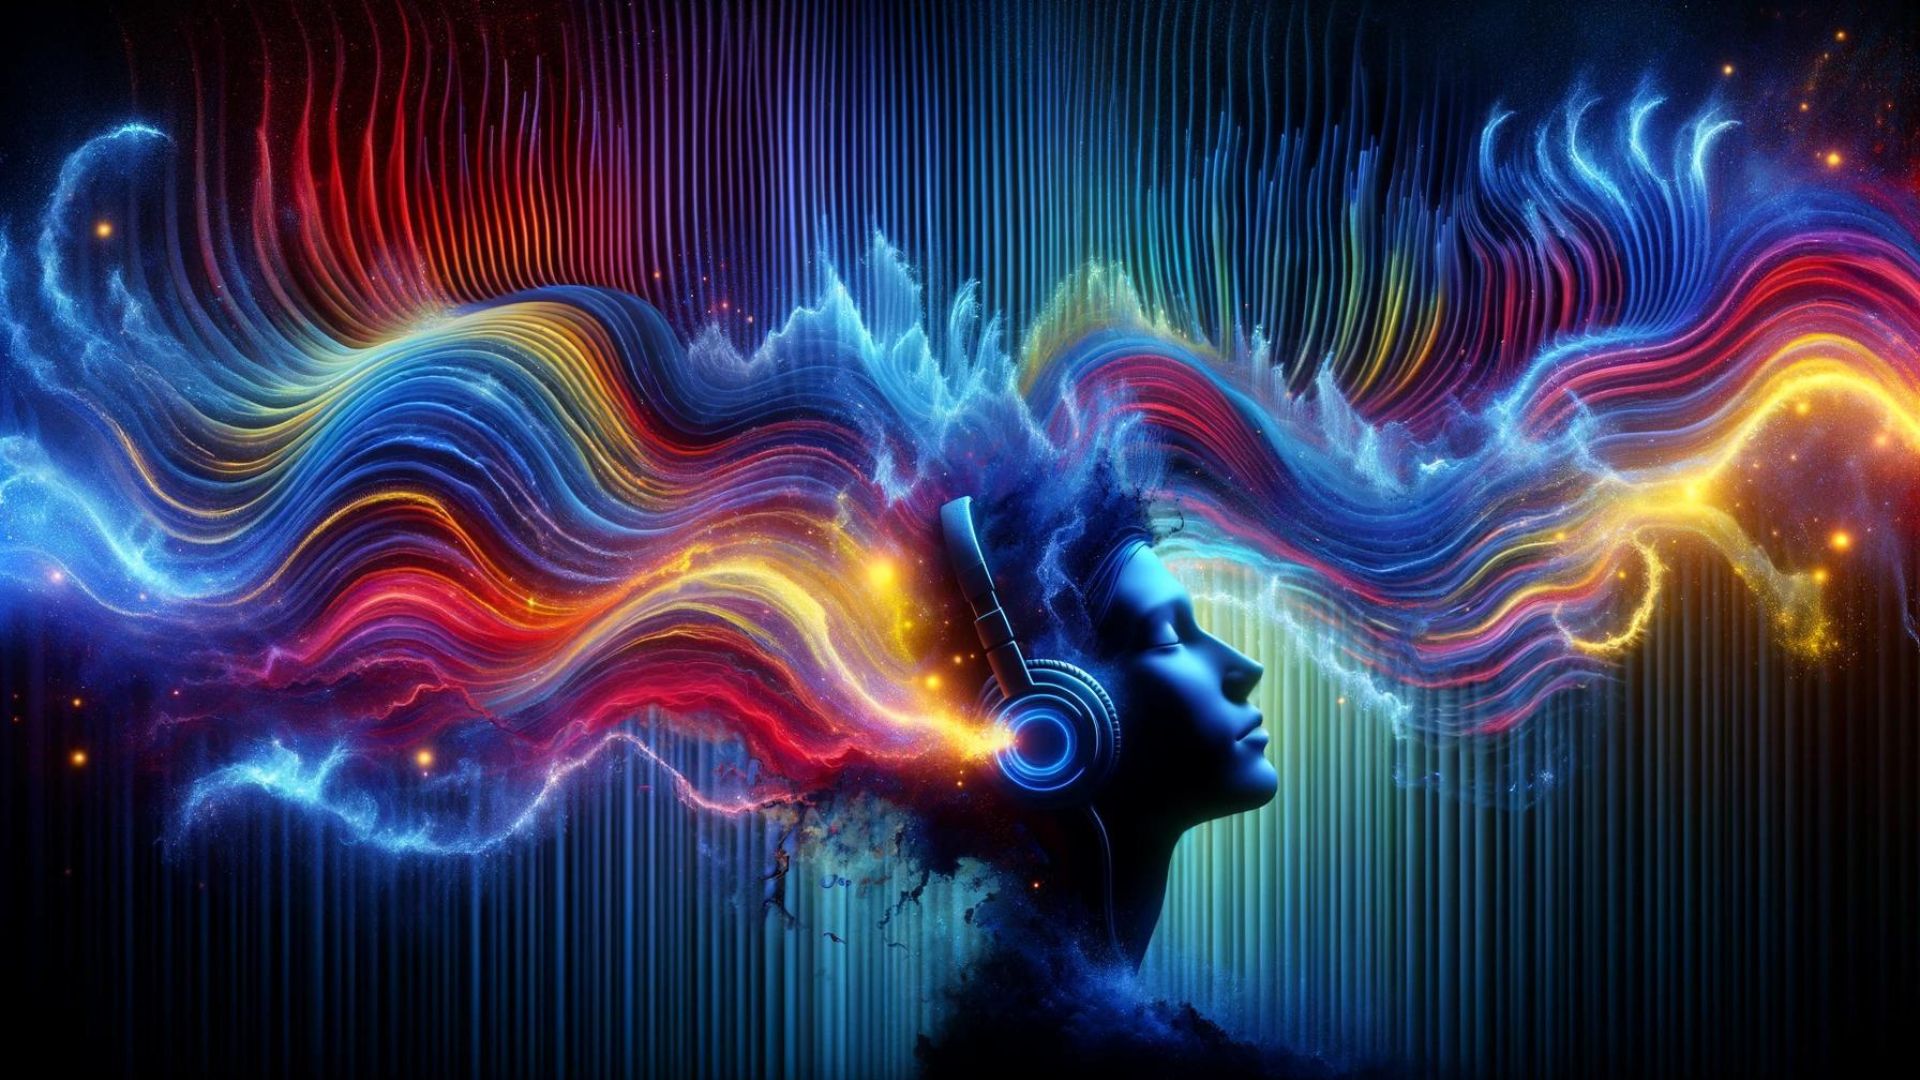 Certain music frequencies might influence your emotional state